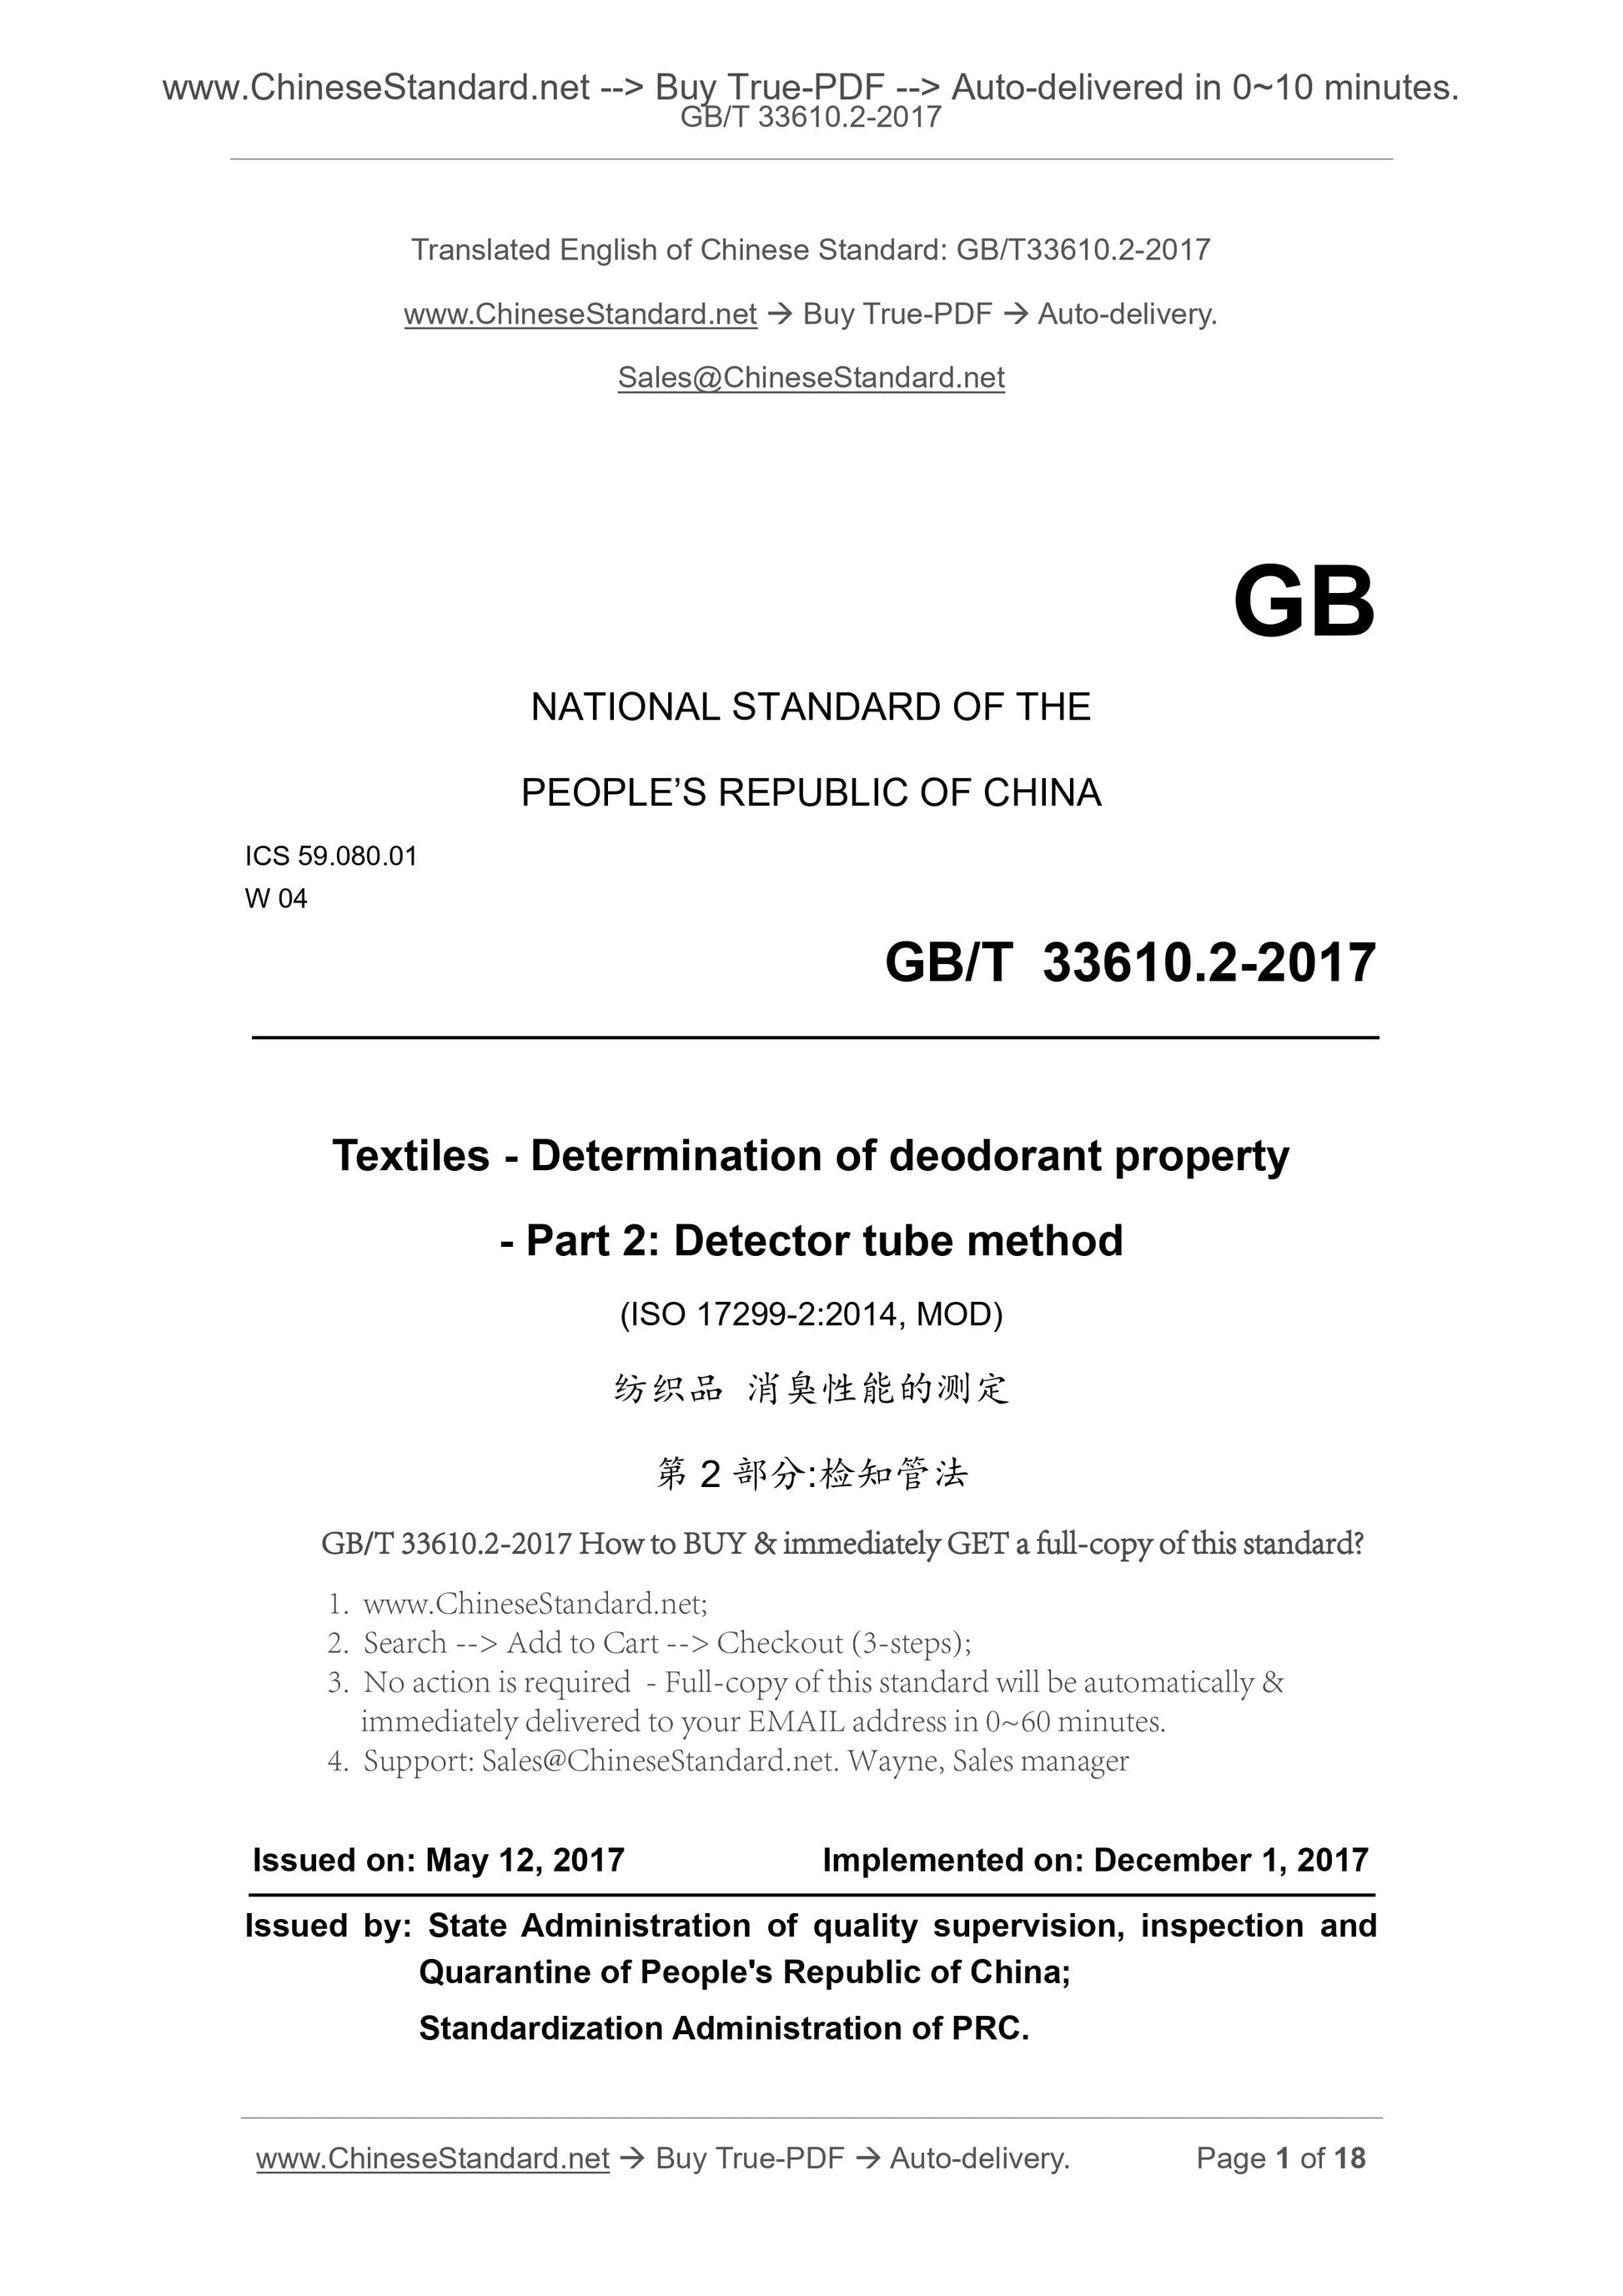 GB/T 33610.2-2017 Page 1